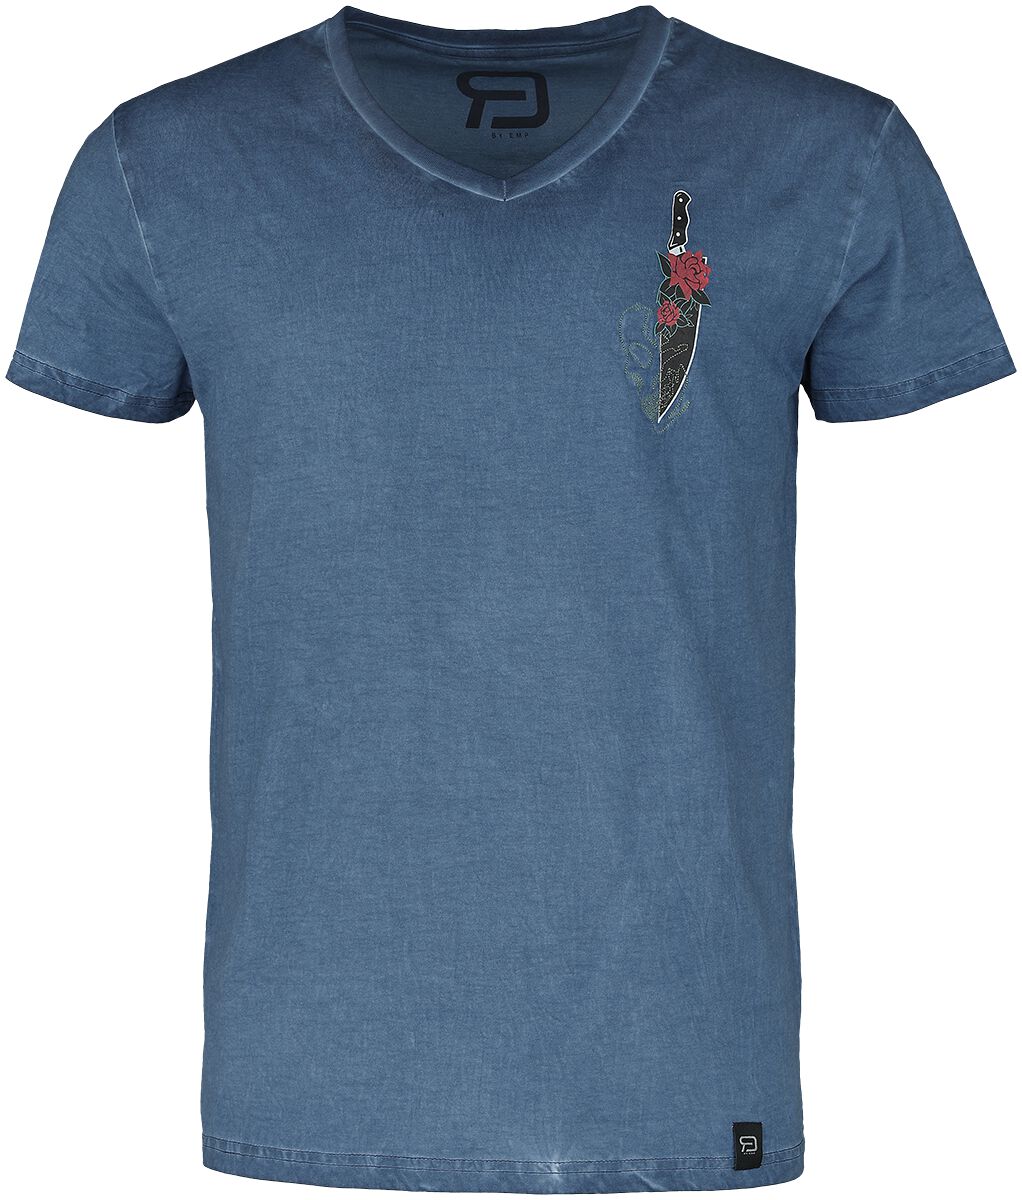 Image of T-Shirt di RED by EMP - T-shirt with dagger and embroidery detail - S a M - Uomo - blu